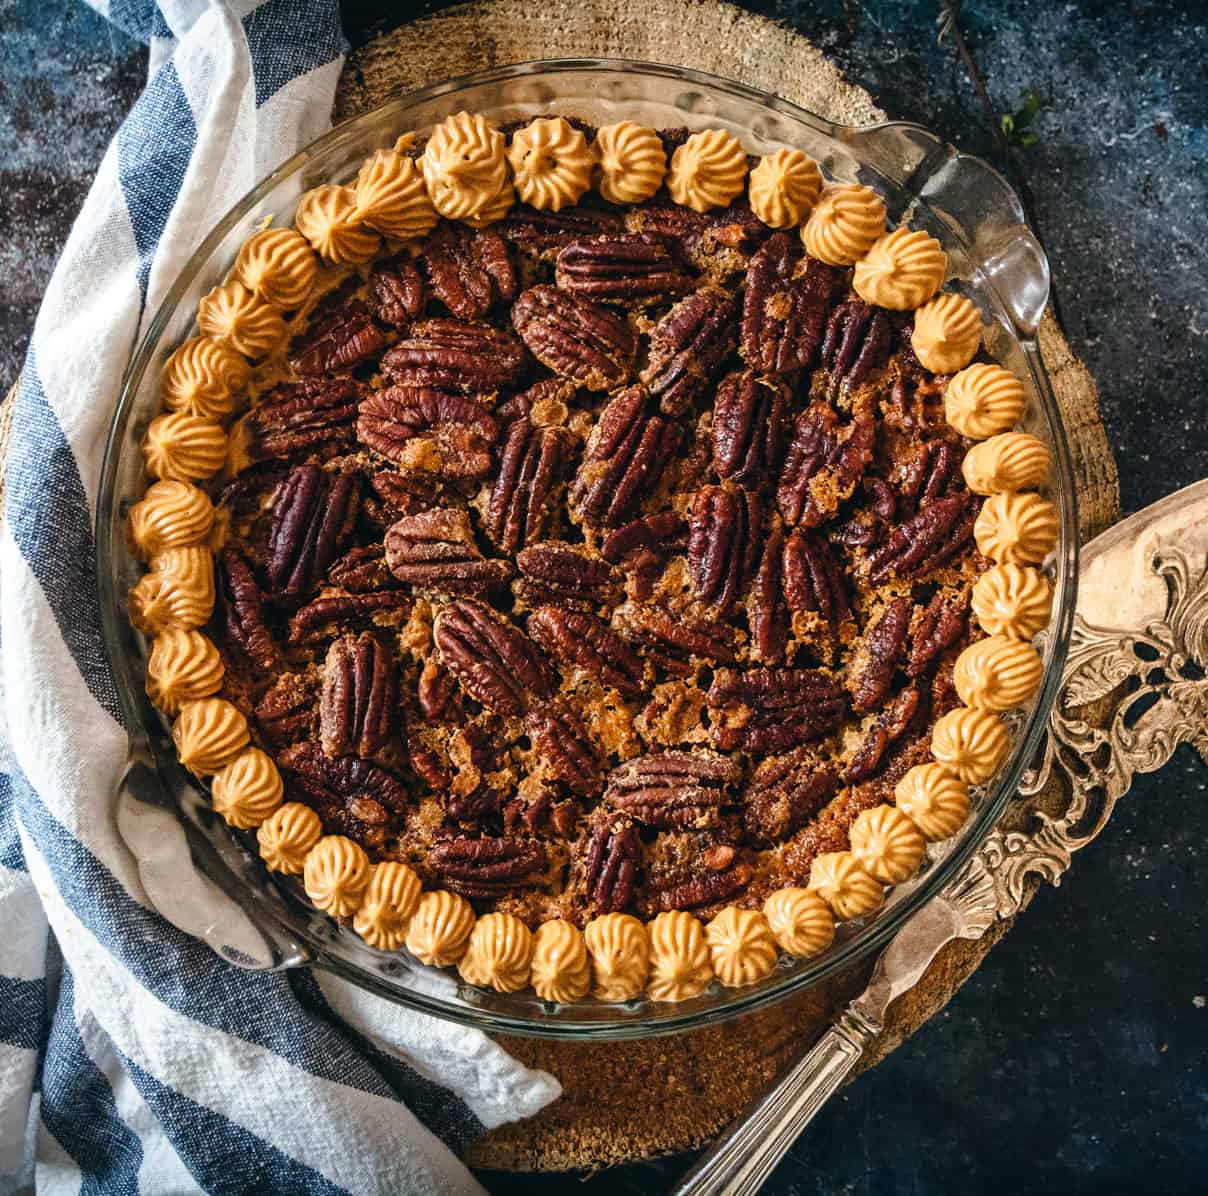 Gluten free pecan pie with maple syrup and maple dulce de leche cream